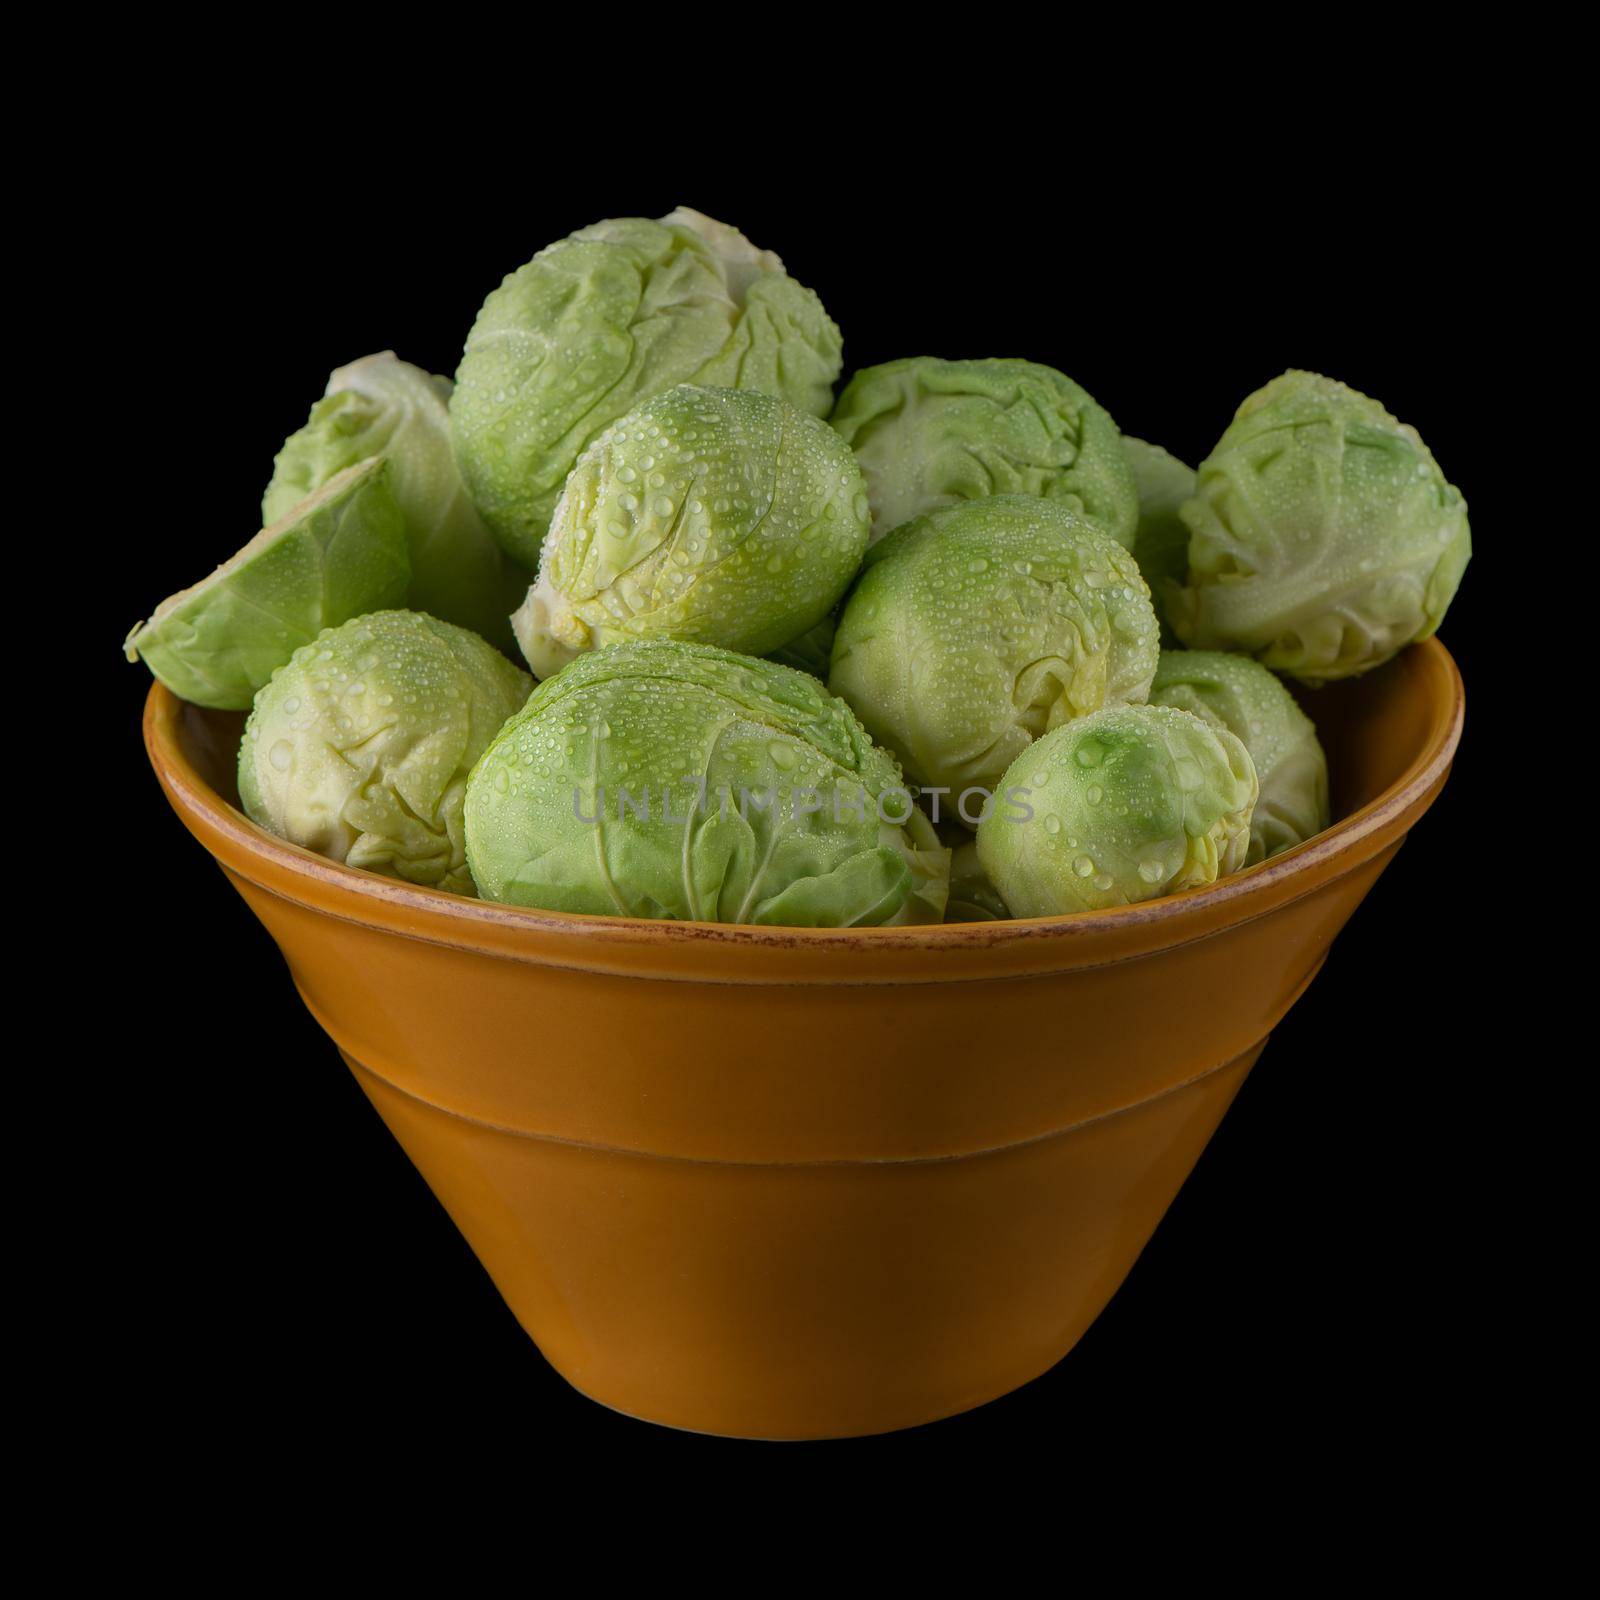 Fresh brussels sprouts on green ceramic bowl isolated on white background.